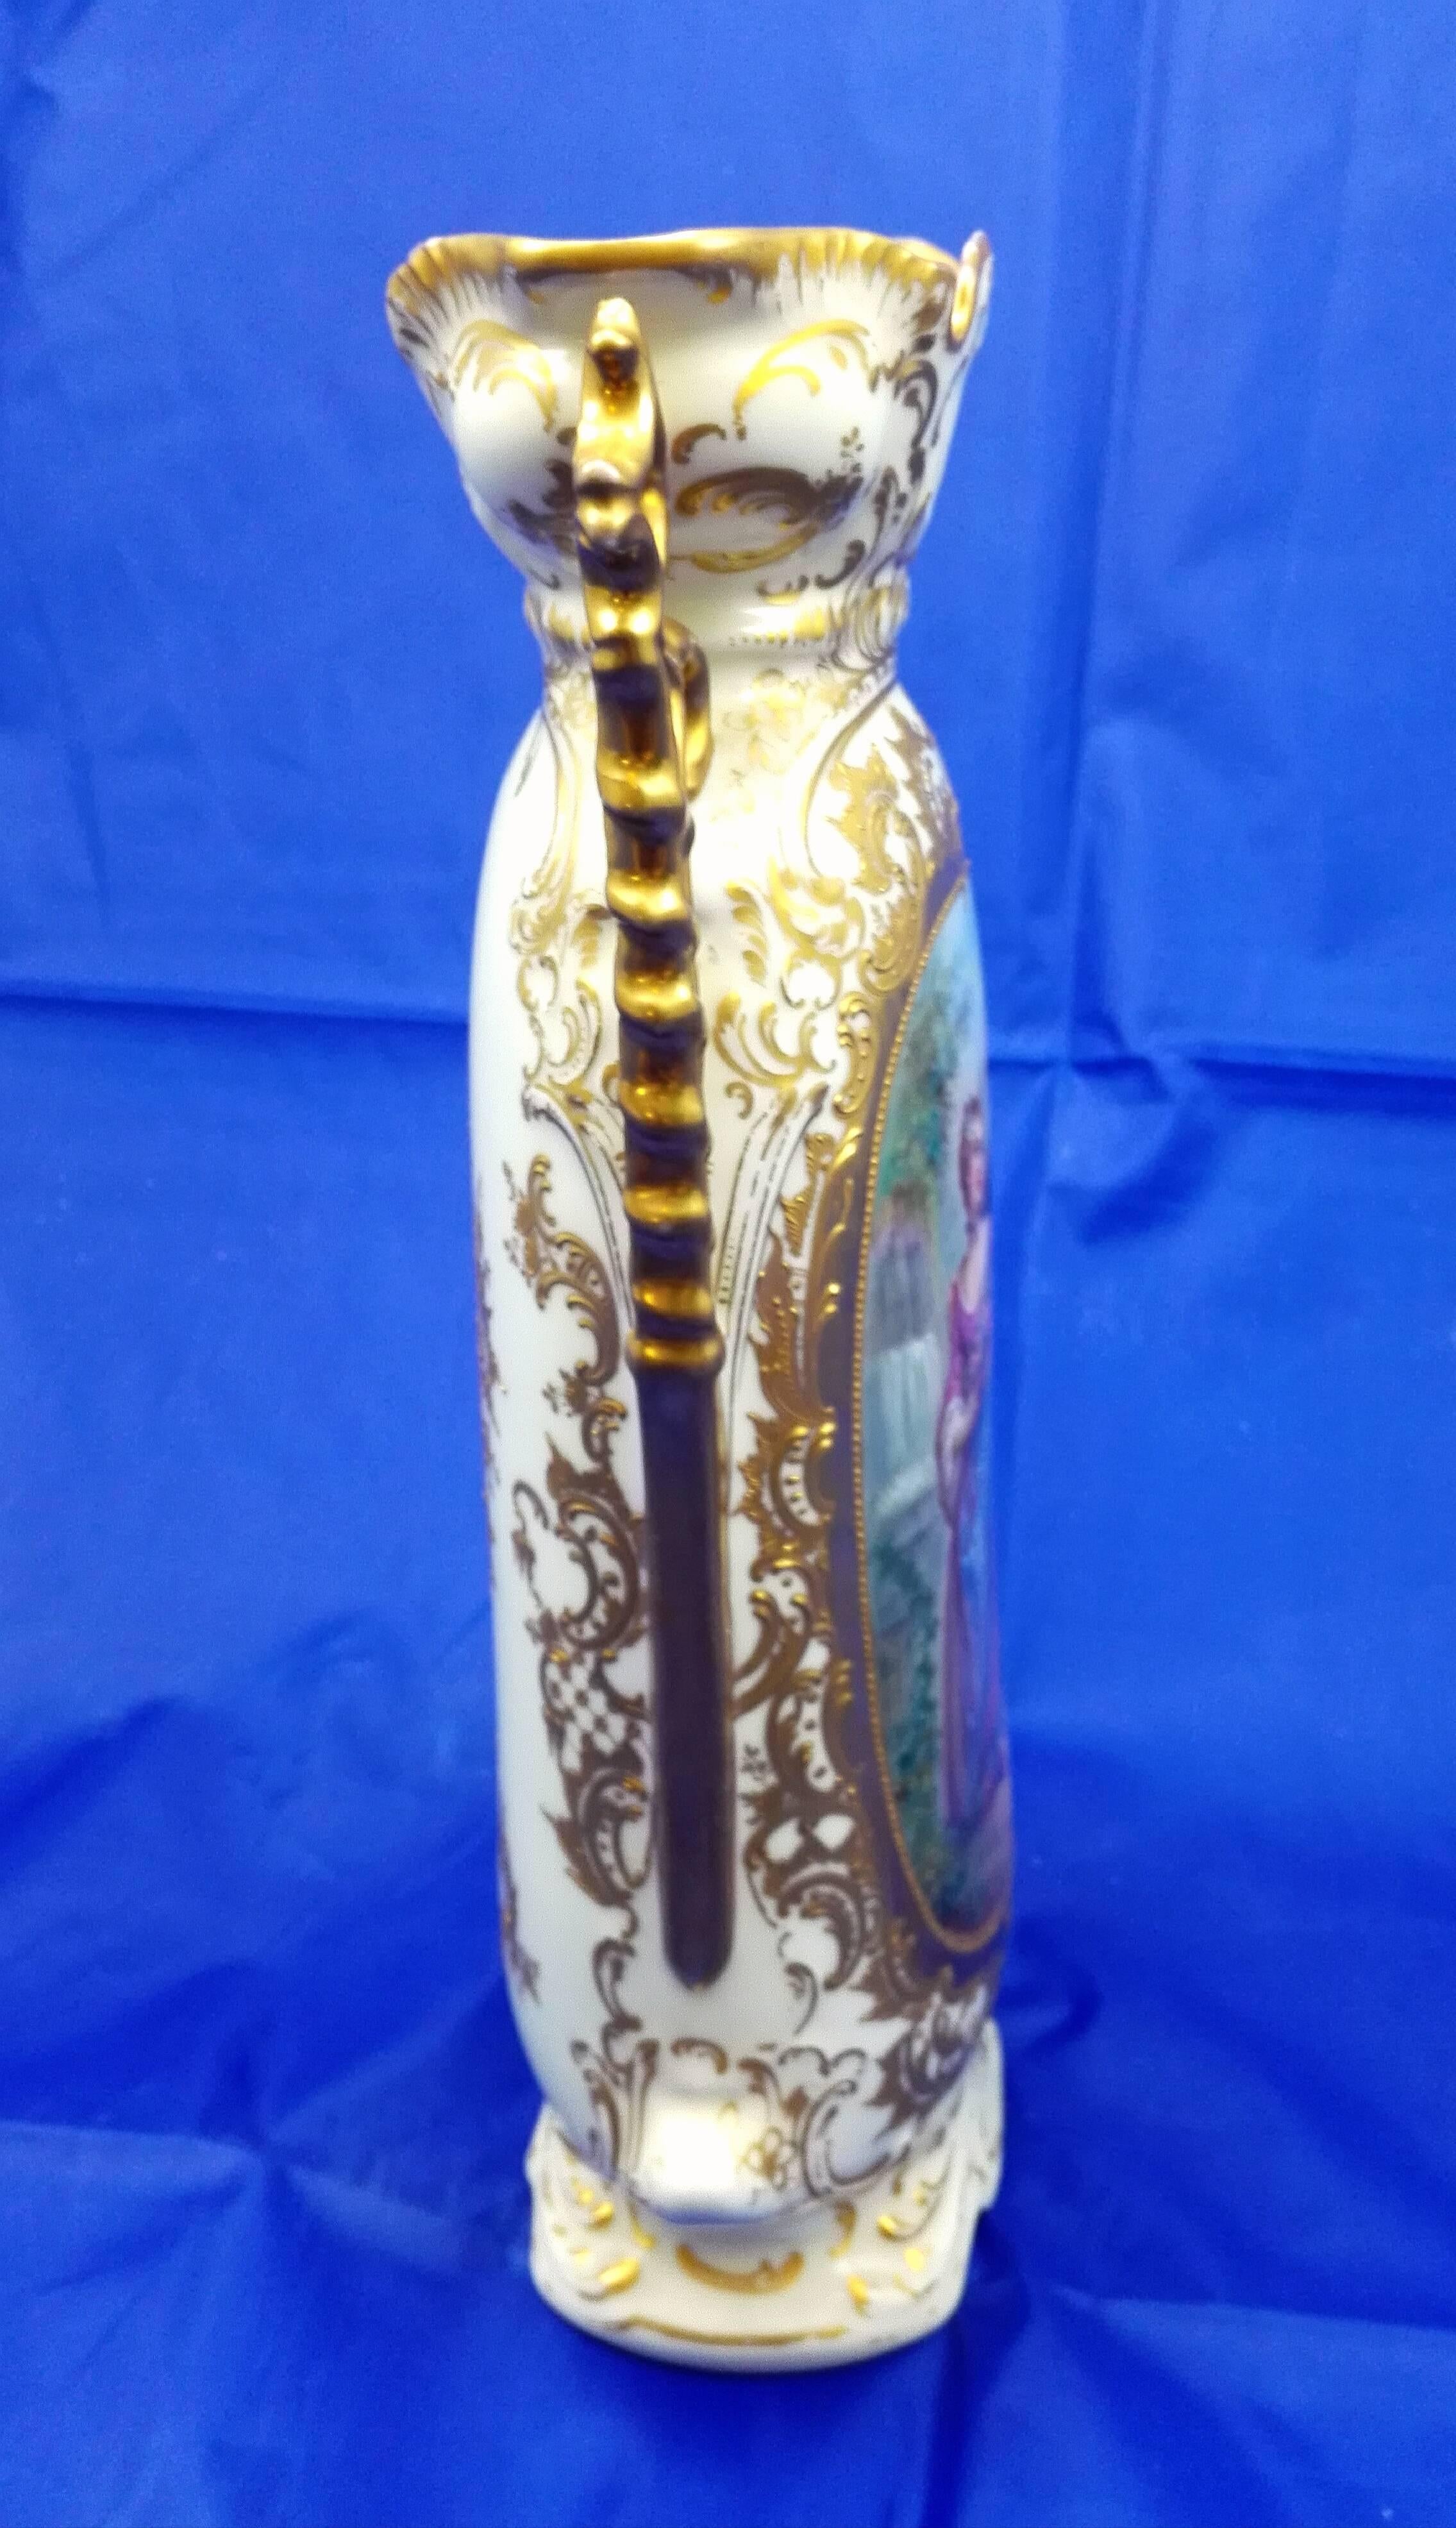 Austrian 19th Century Old Vienna Marked Porcelain Vase Figural Hand-Painted and Gilded For Sale